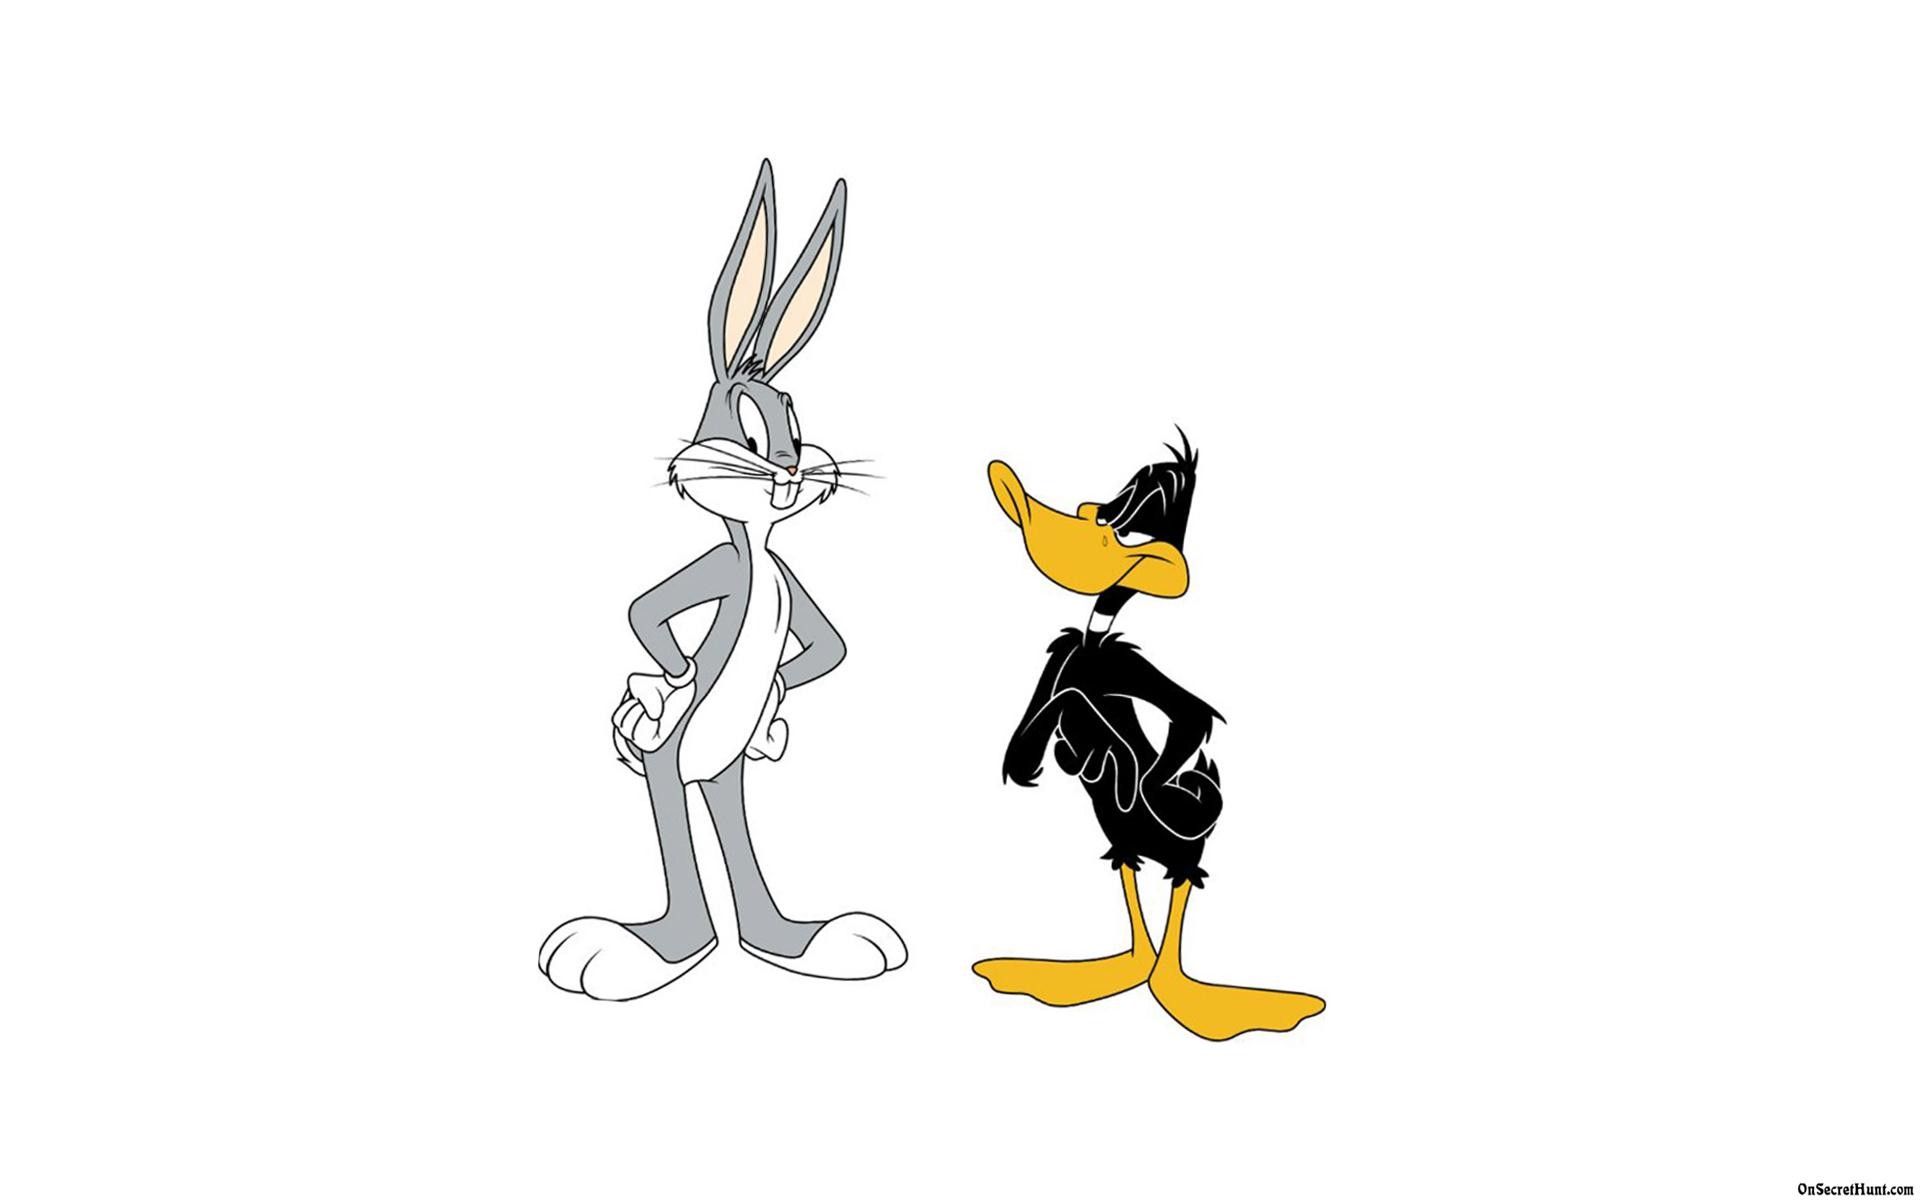 A cartoon of two birds and one duck - Bugs Bunny, Looney Tunes